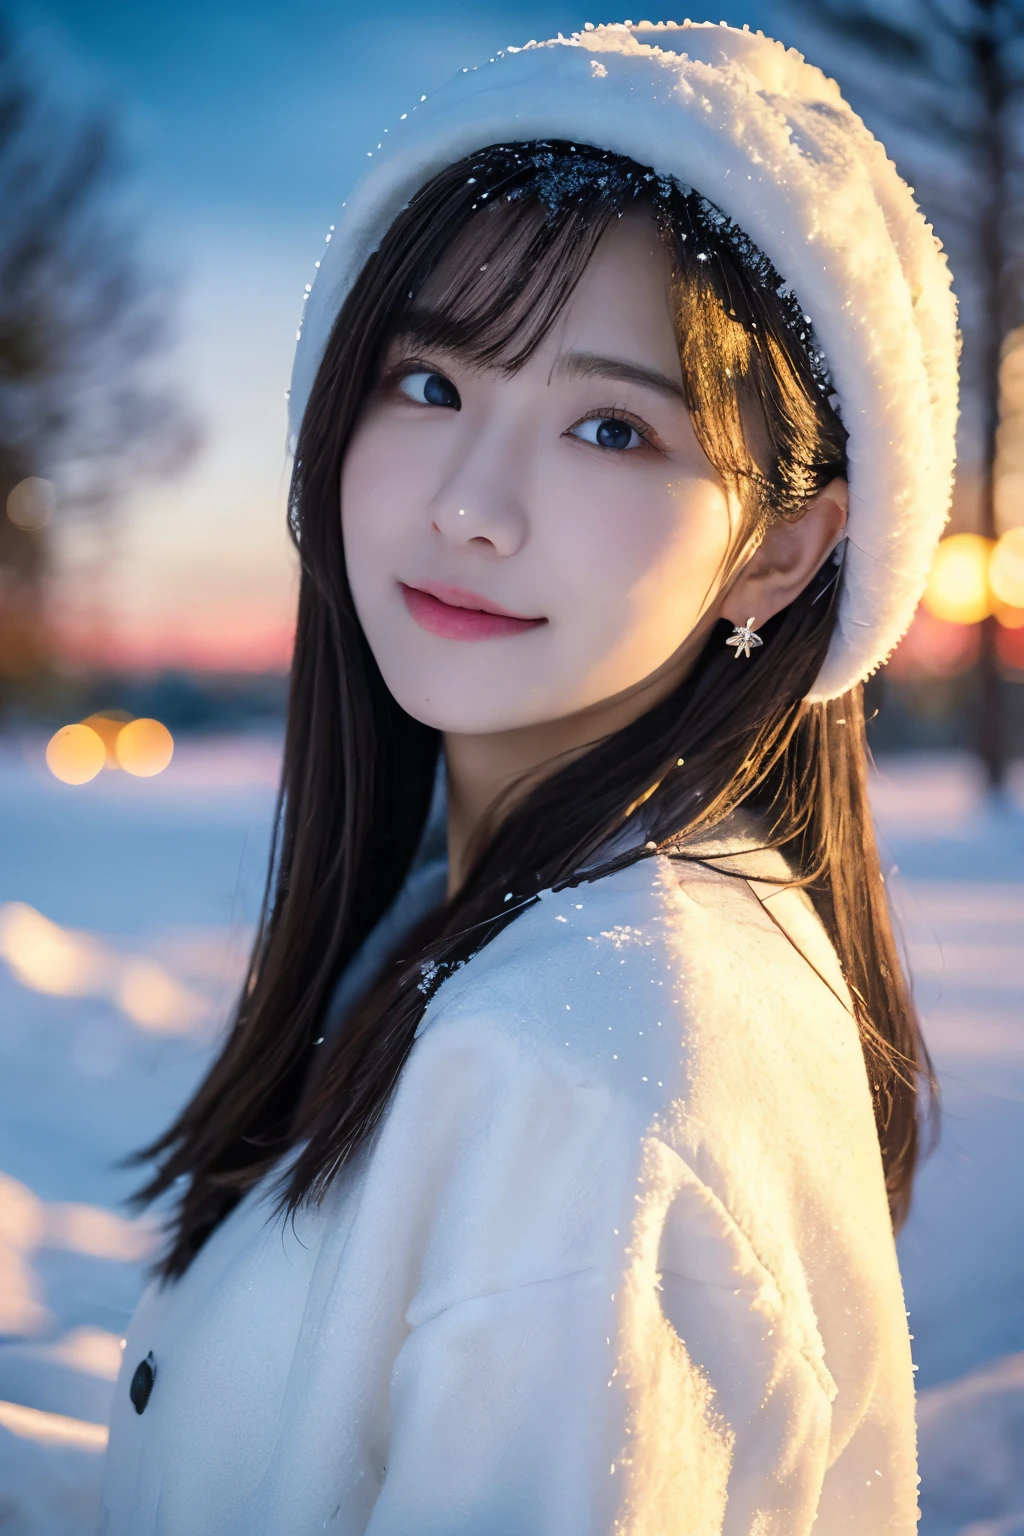 1 girl, (White winter clothes:1.2), Japanese beautiful actress, 
photogenic, Snow Princess, long eyelashes, Snowflake Earrings,
(Raw photo, best quality), (Reality, photorealistic:1.4), (masutepiece), 
beautiful detailed eyes, beautiful detailed lips, highly detailed eyes and face, 
BREAK is
 (Frozen snow field in winter Lapland), (The last vestiges of the twilight sky:1.4), 
ethereal beauty, Swirling snowflakes, Snowy trees, Powder snow, snow-capped mountain, 
Snowy field landscape at dusk, 
Indigo and dark vermilion color scheme, Dramatic Lighting, Fantastic atmosphere, 
BREAK is 
Perfect Anatomy, whole body slender, small breasts, short hair, parted bangs, Angel Smile, 
Crystal-like skin, make eyes clear, Strobe photography, catch light